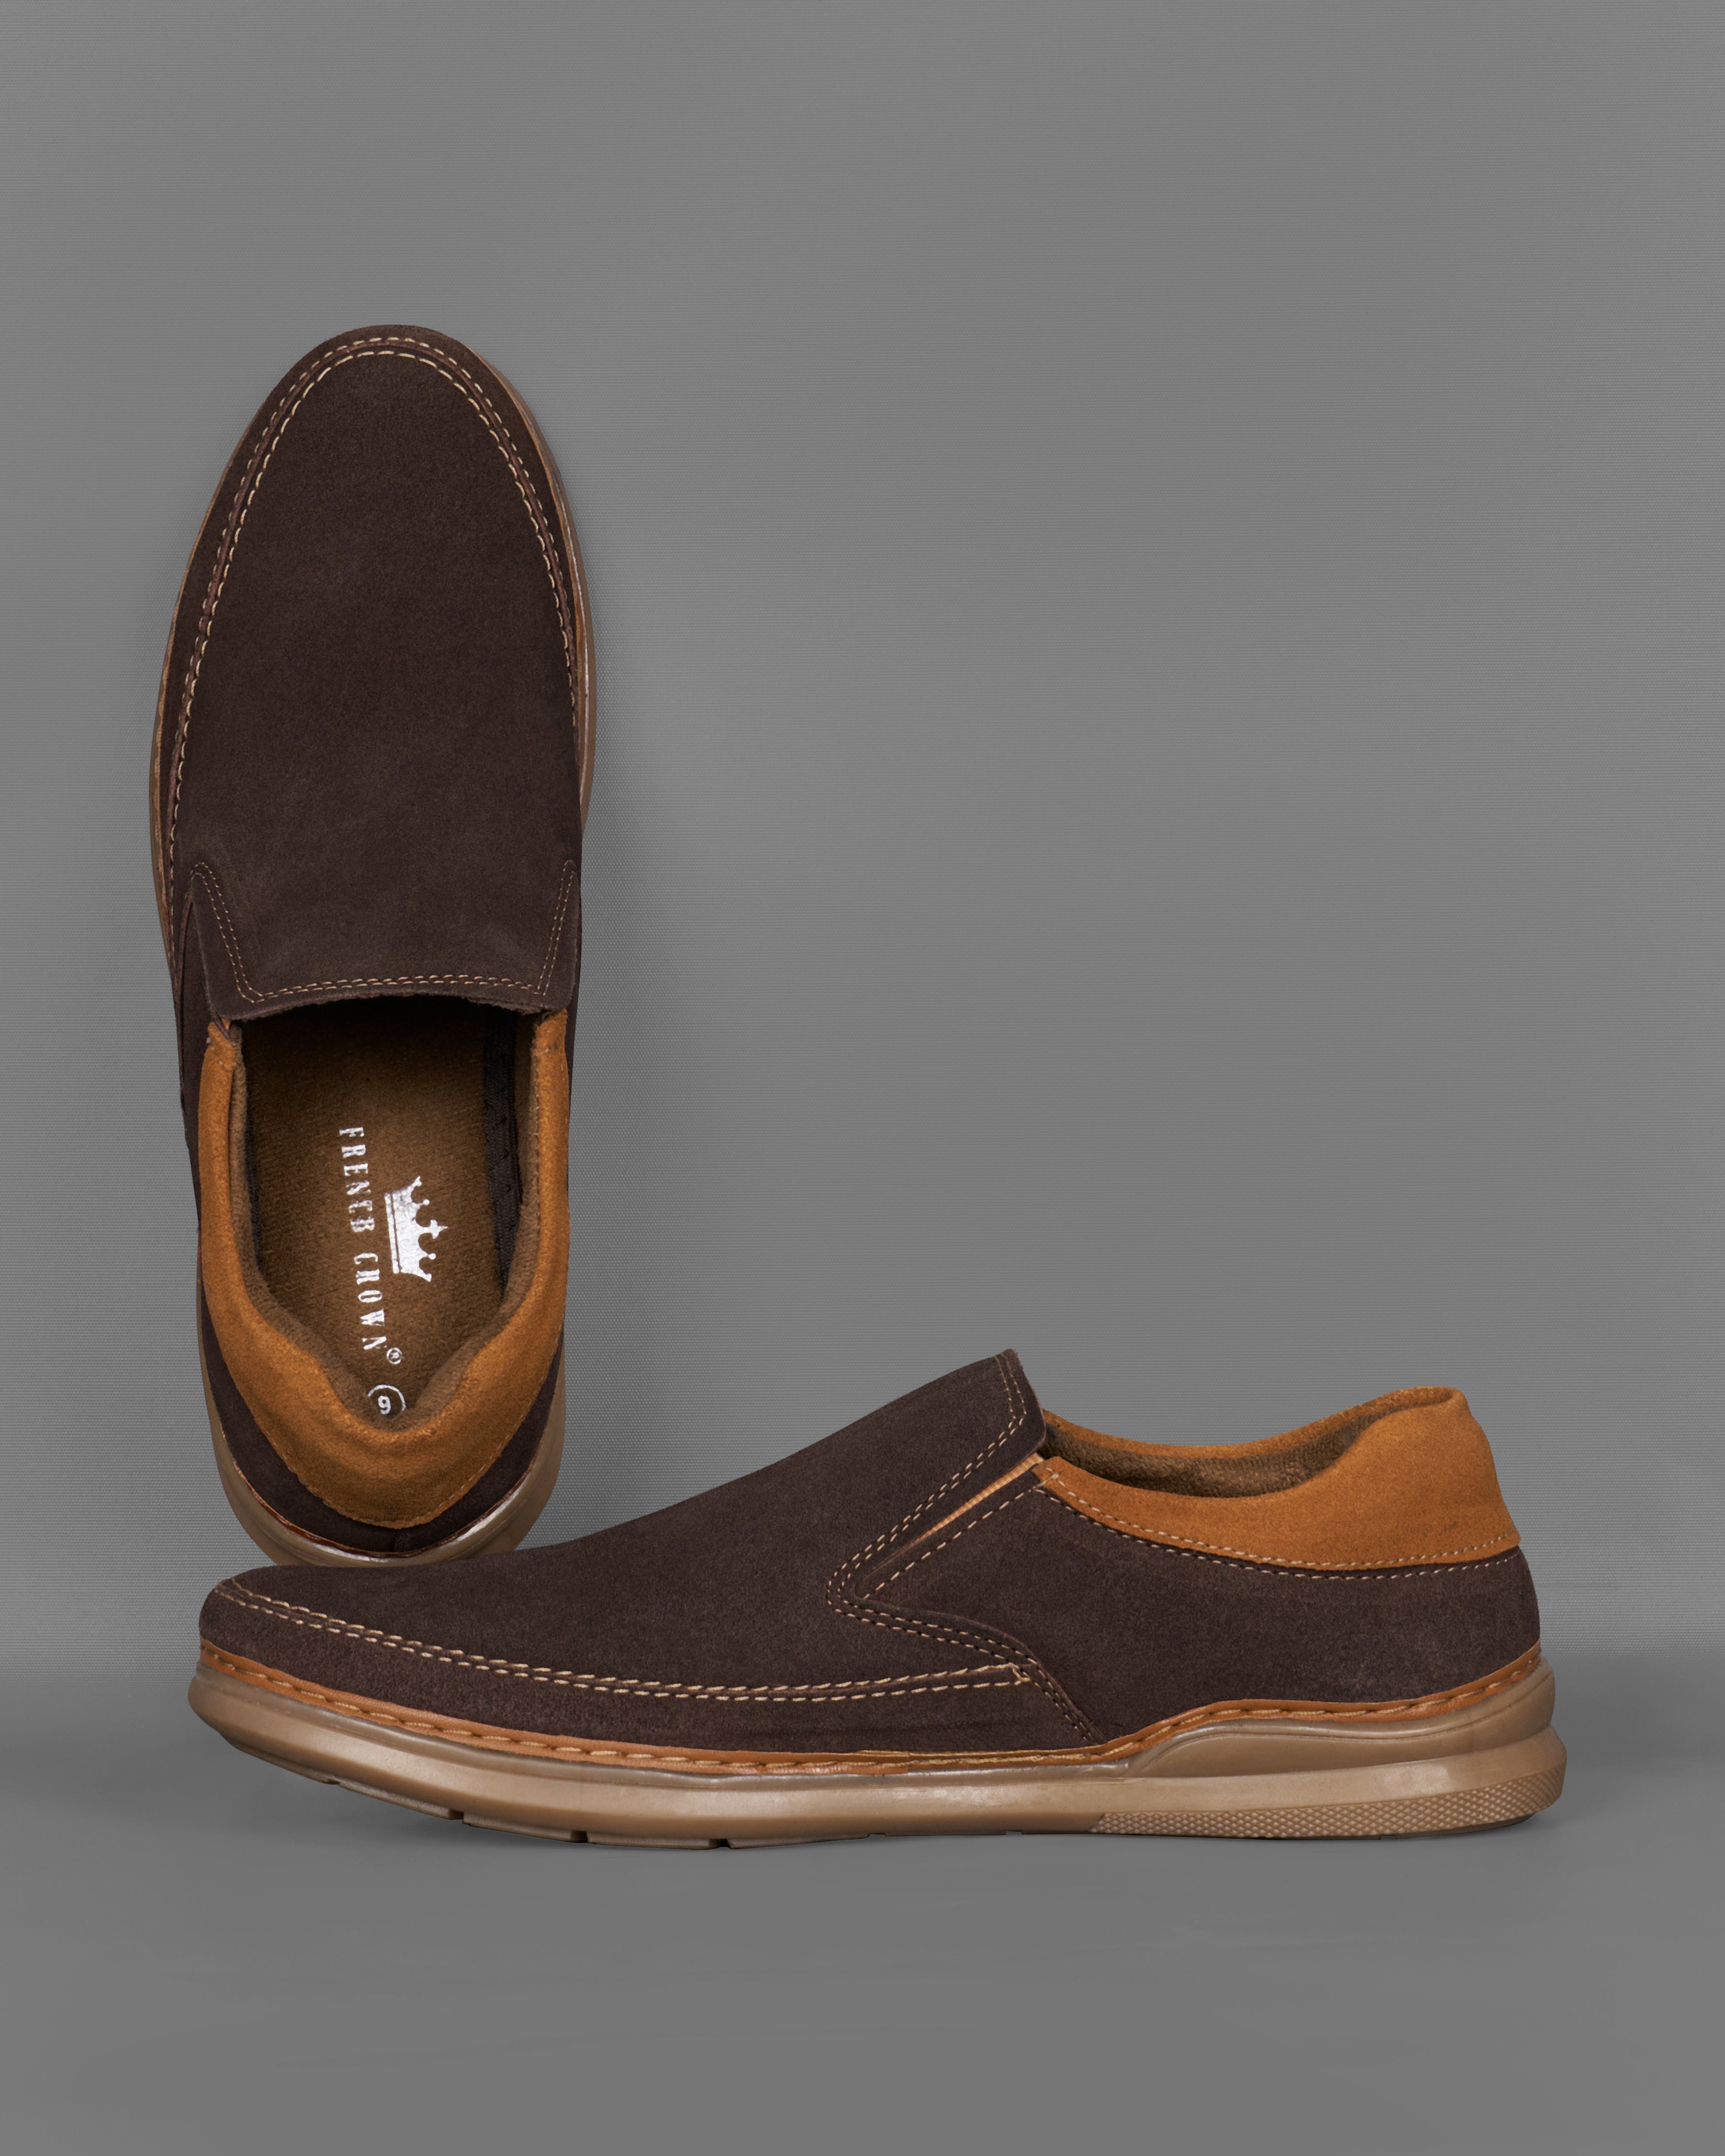 Deep Coffee Brown Slip On Suede leather Shoes FT074-6, FT074-7, FT074-8, FT074-9, FT074-10, FT074-11